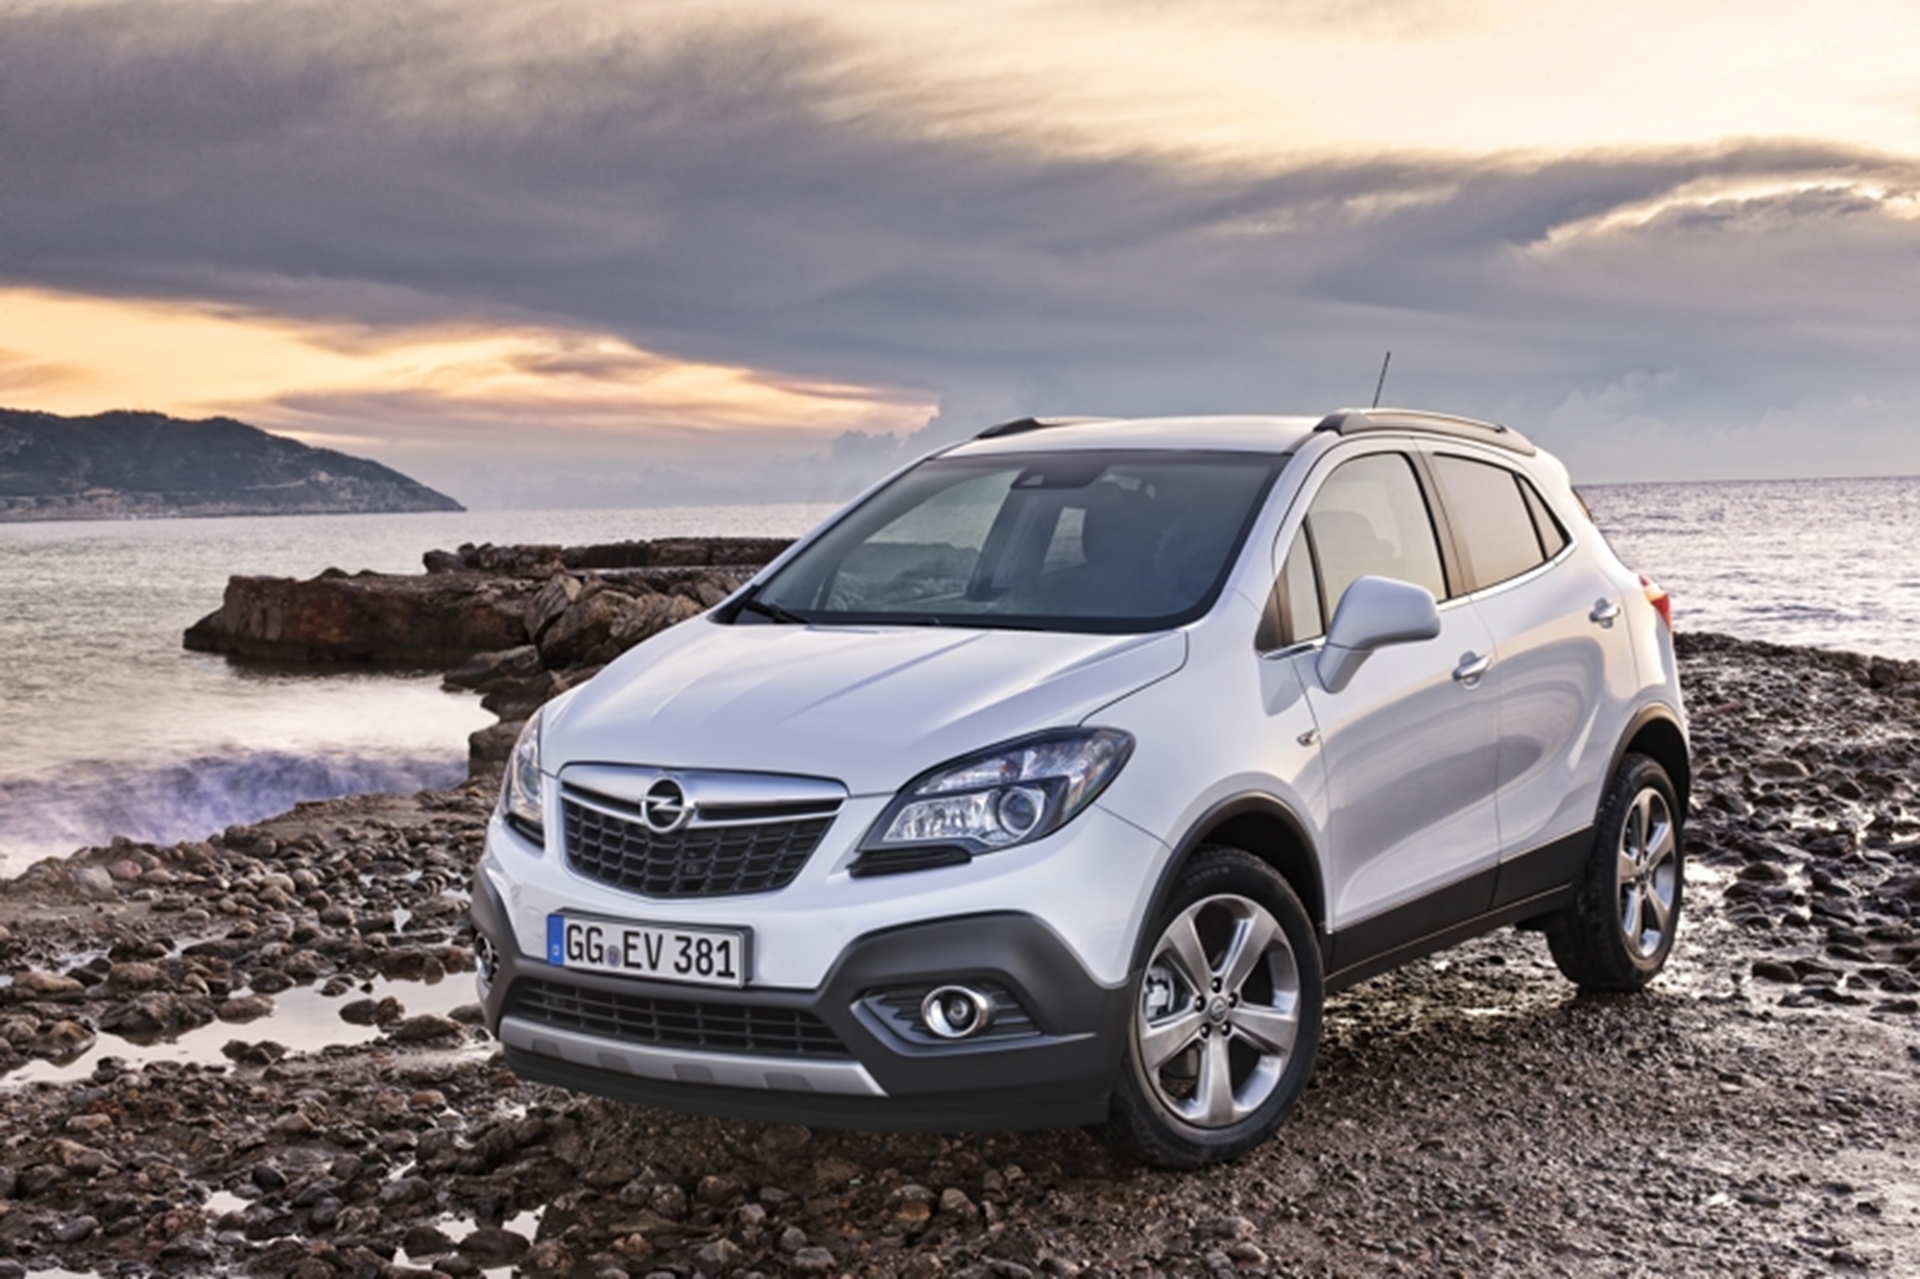 Two Opel World Premieres at the 2012 Geneva Show